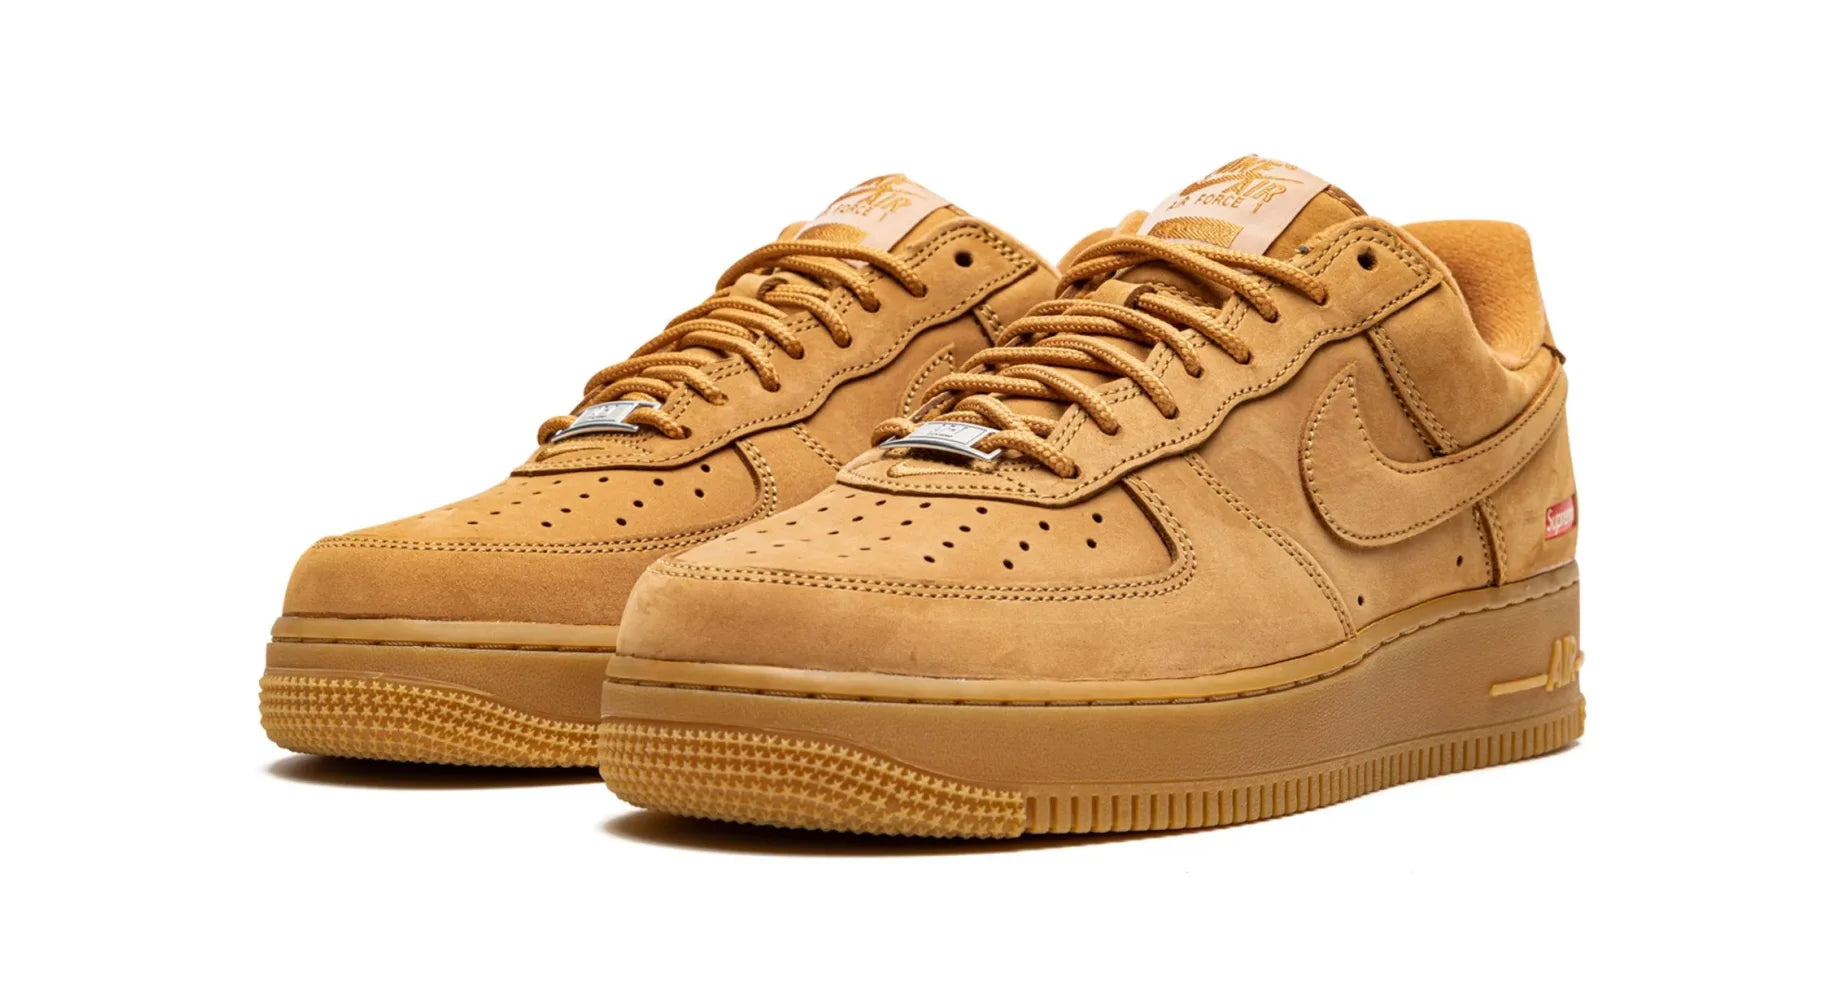 Nike Supreme x Air Force 1 Low SP Wheat